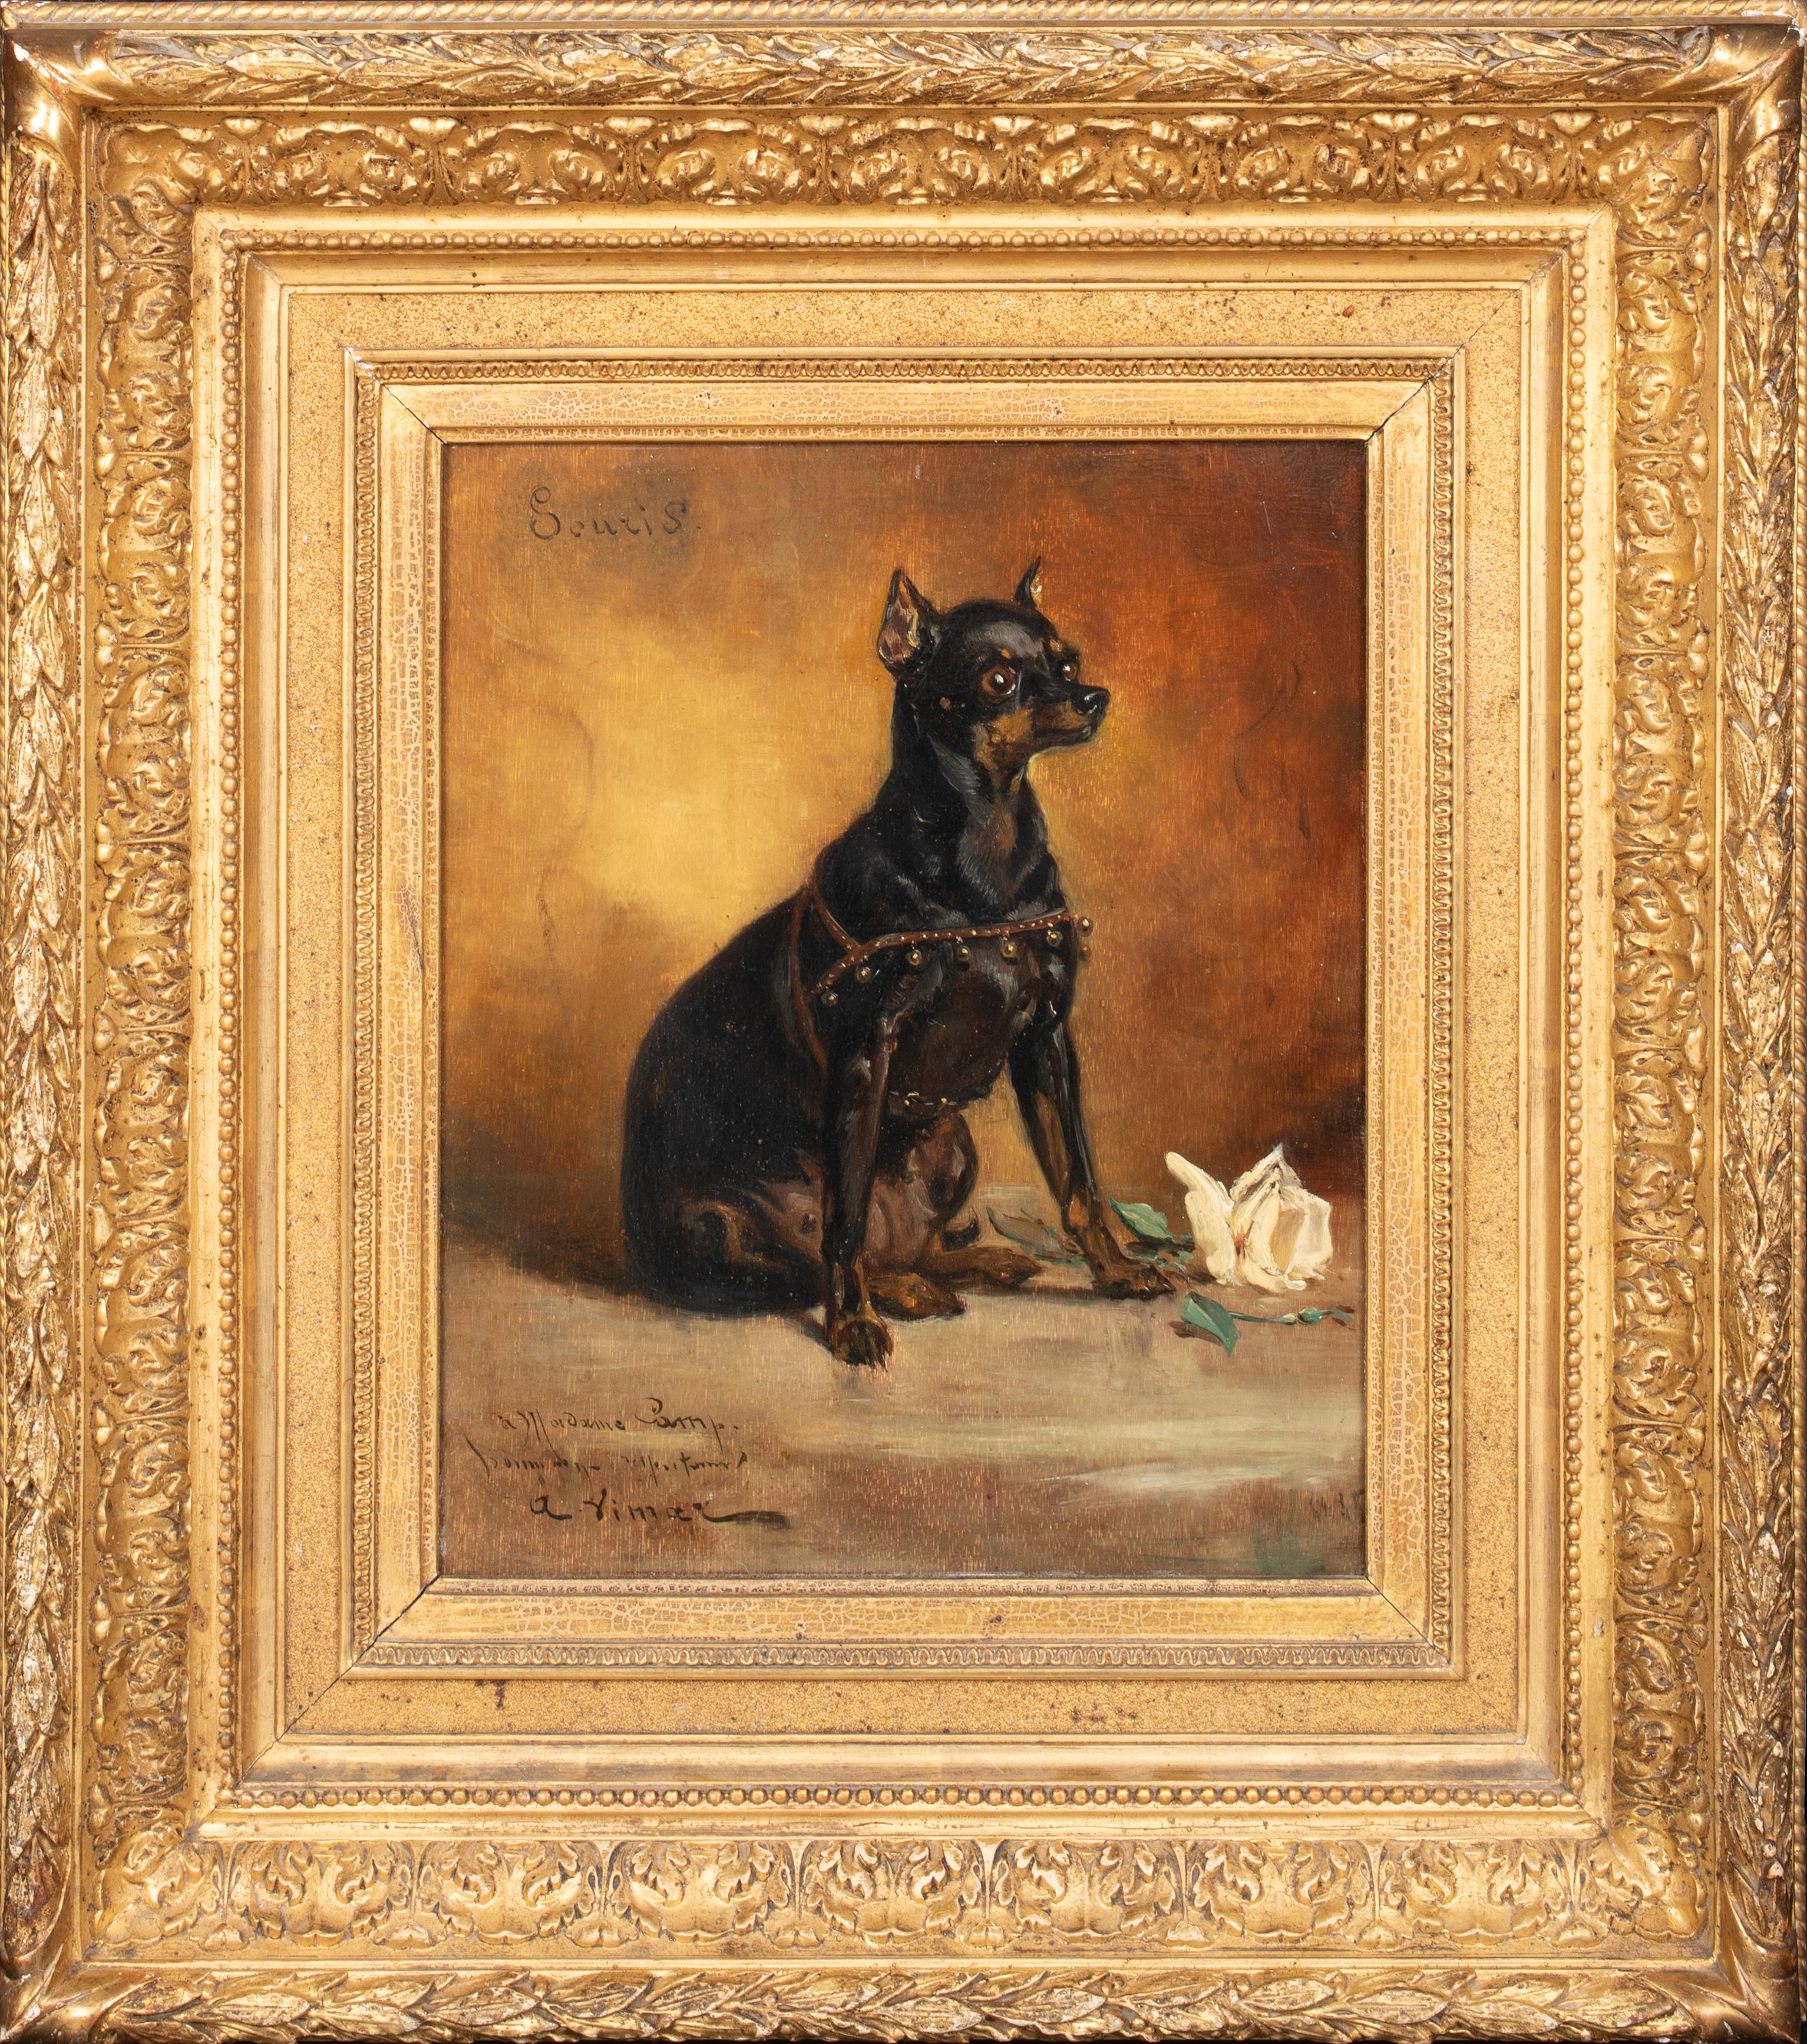 Unknown Animal Painting -  Portrait Of "Souris" A French Black Terrier, 19th Century   by AUGUSTE VIMAR 